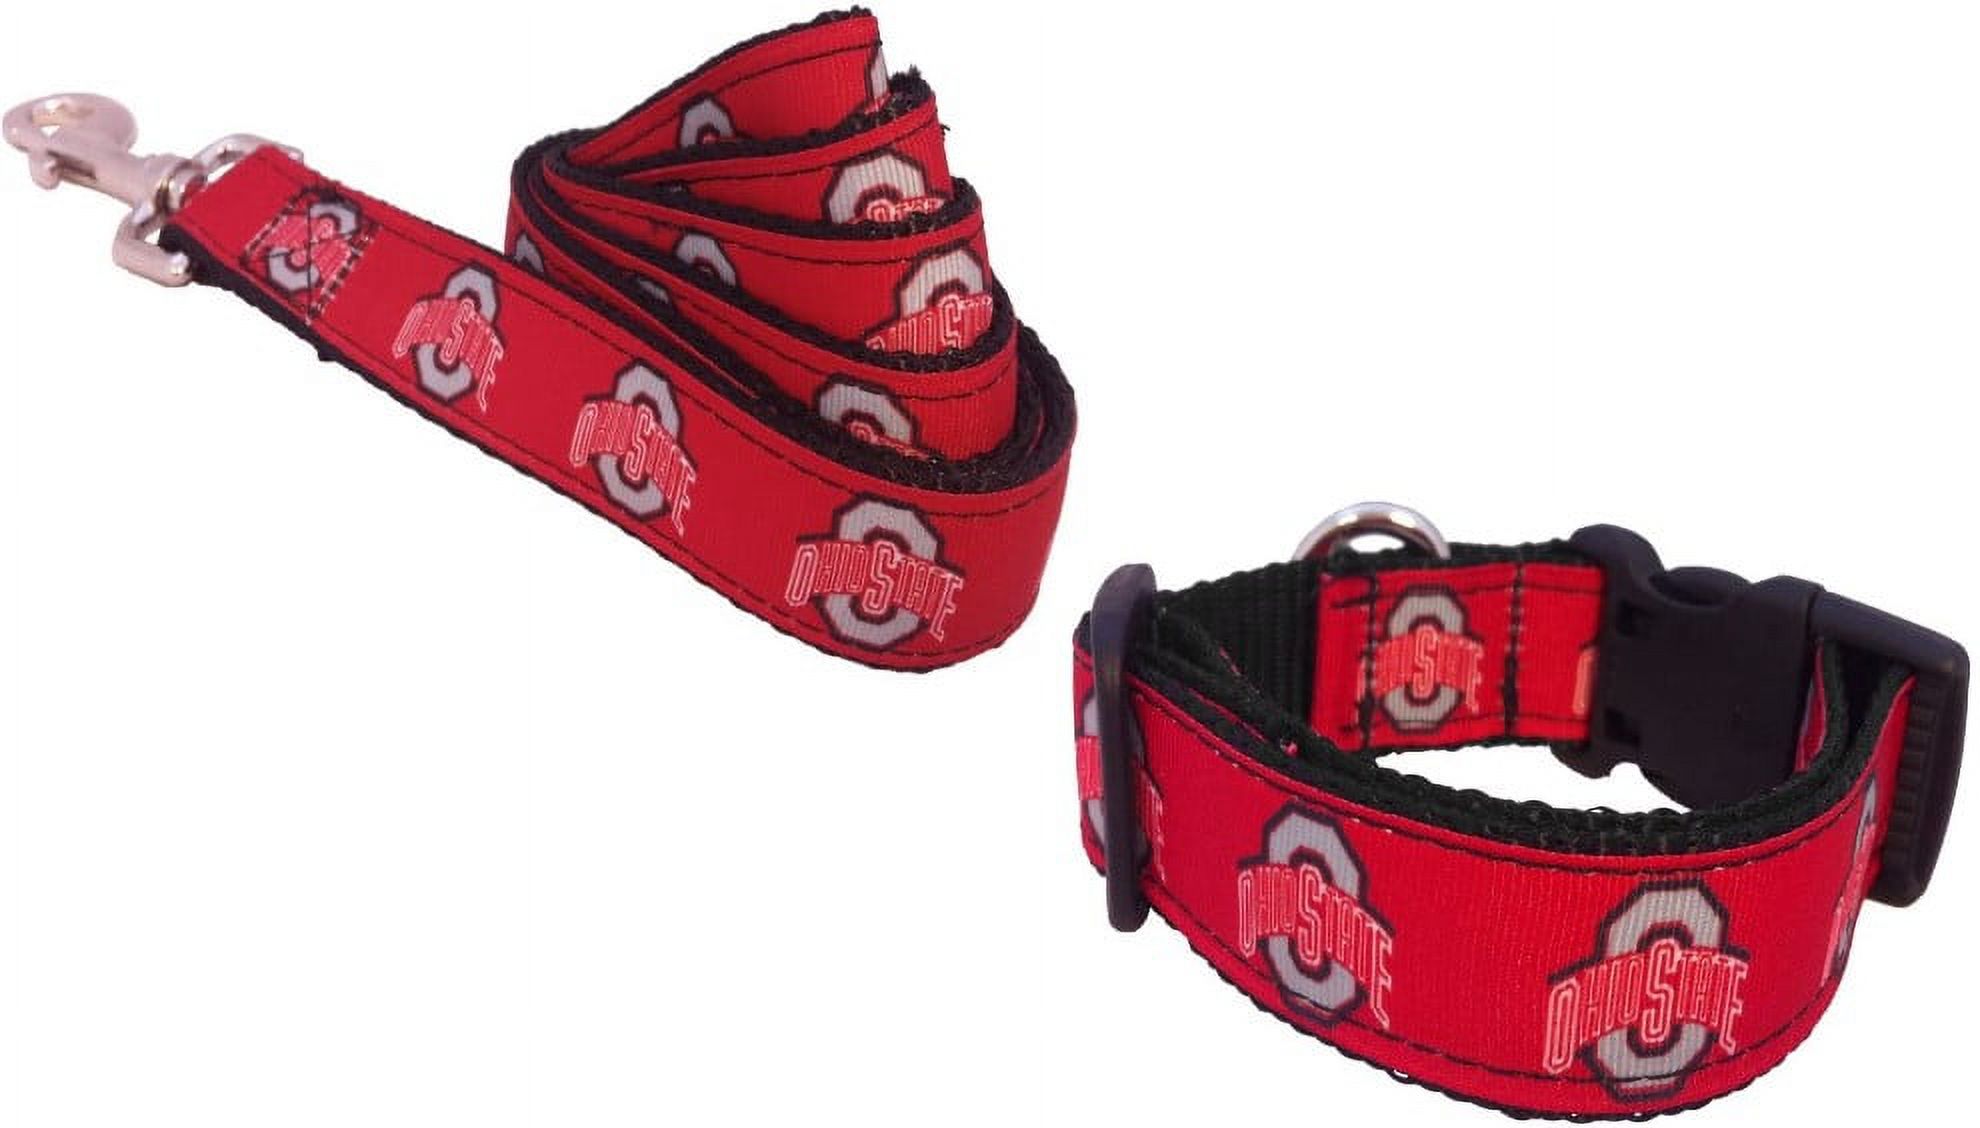 Brand New Ohio/State Small Pet Dog Collar(1 Inch Wide, 8-14 Inch Long), and Small Leash(5/8 Inch Wide, 6 Feet Long) Bundle, Official Team Logo/Red Color - image 1 of 3